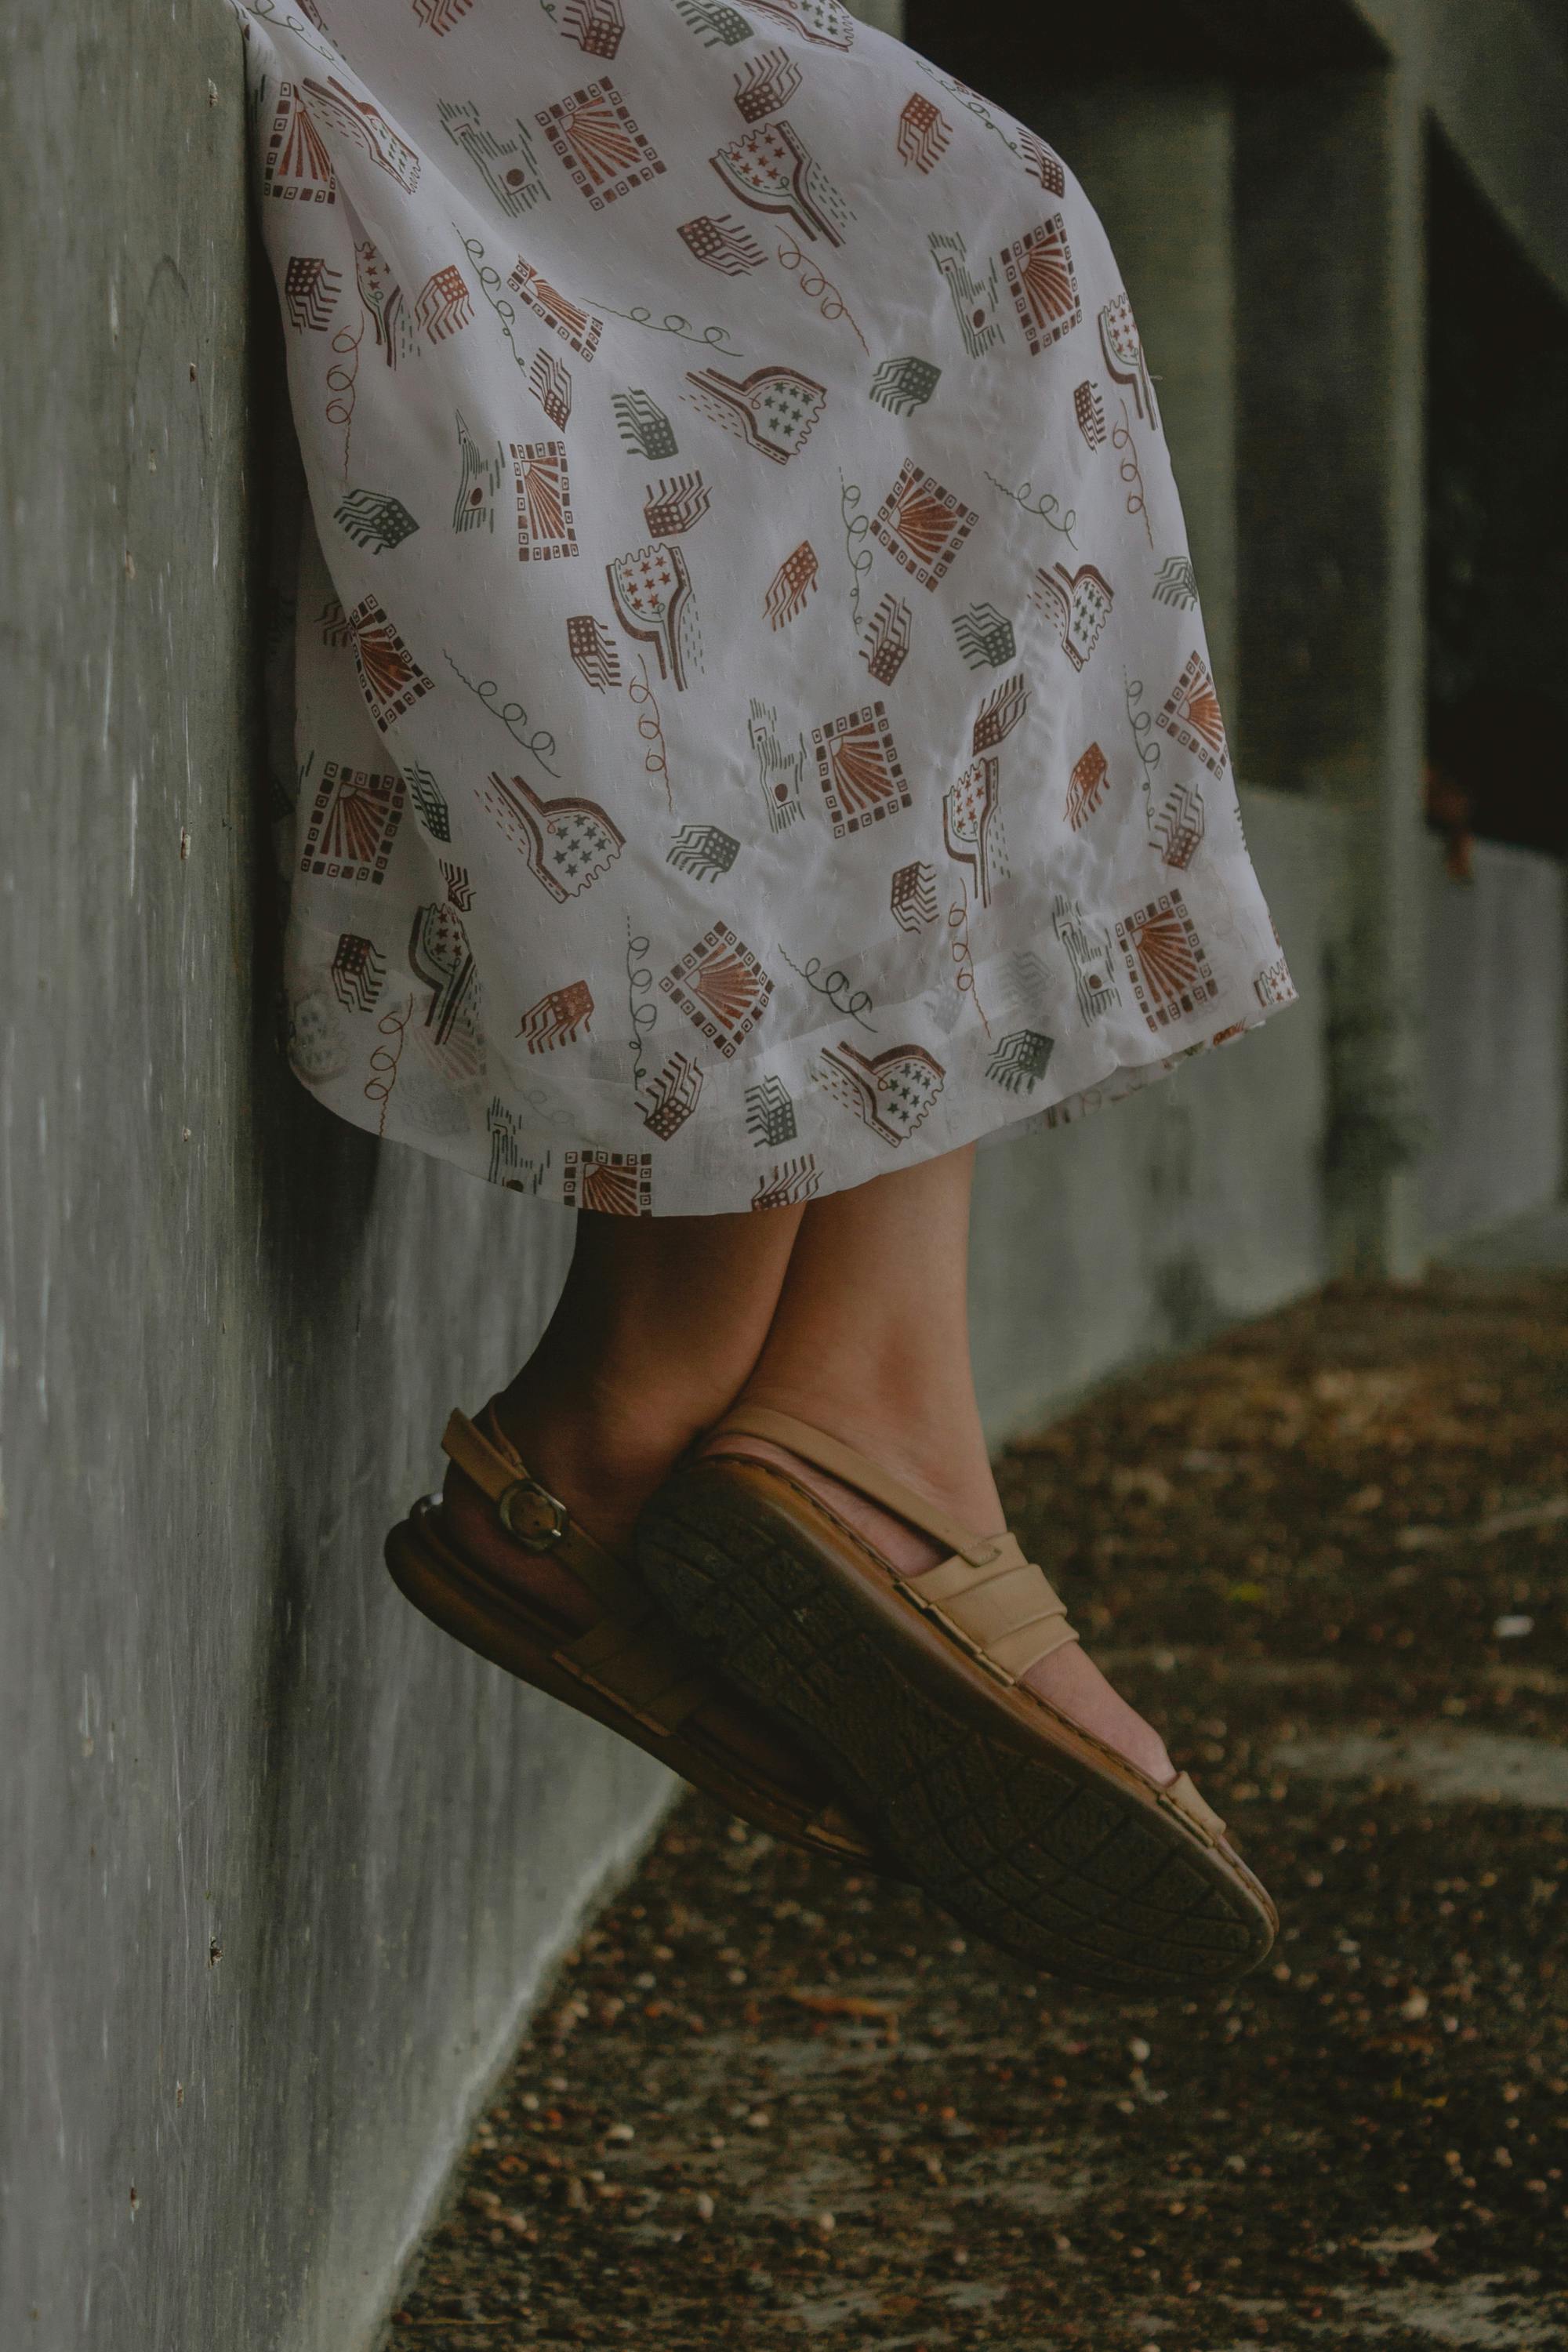 Person Wearing Brown Sandals · Free Stock Photo